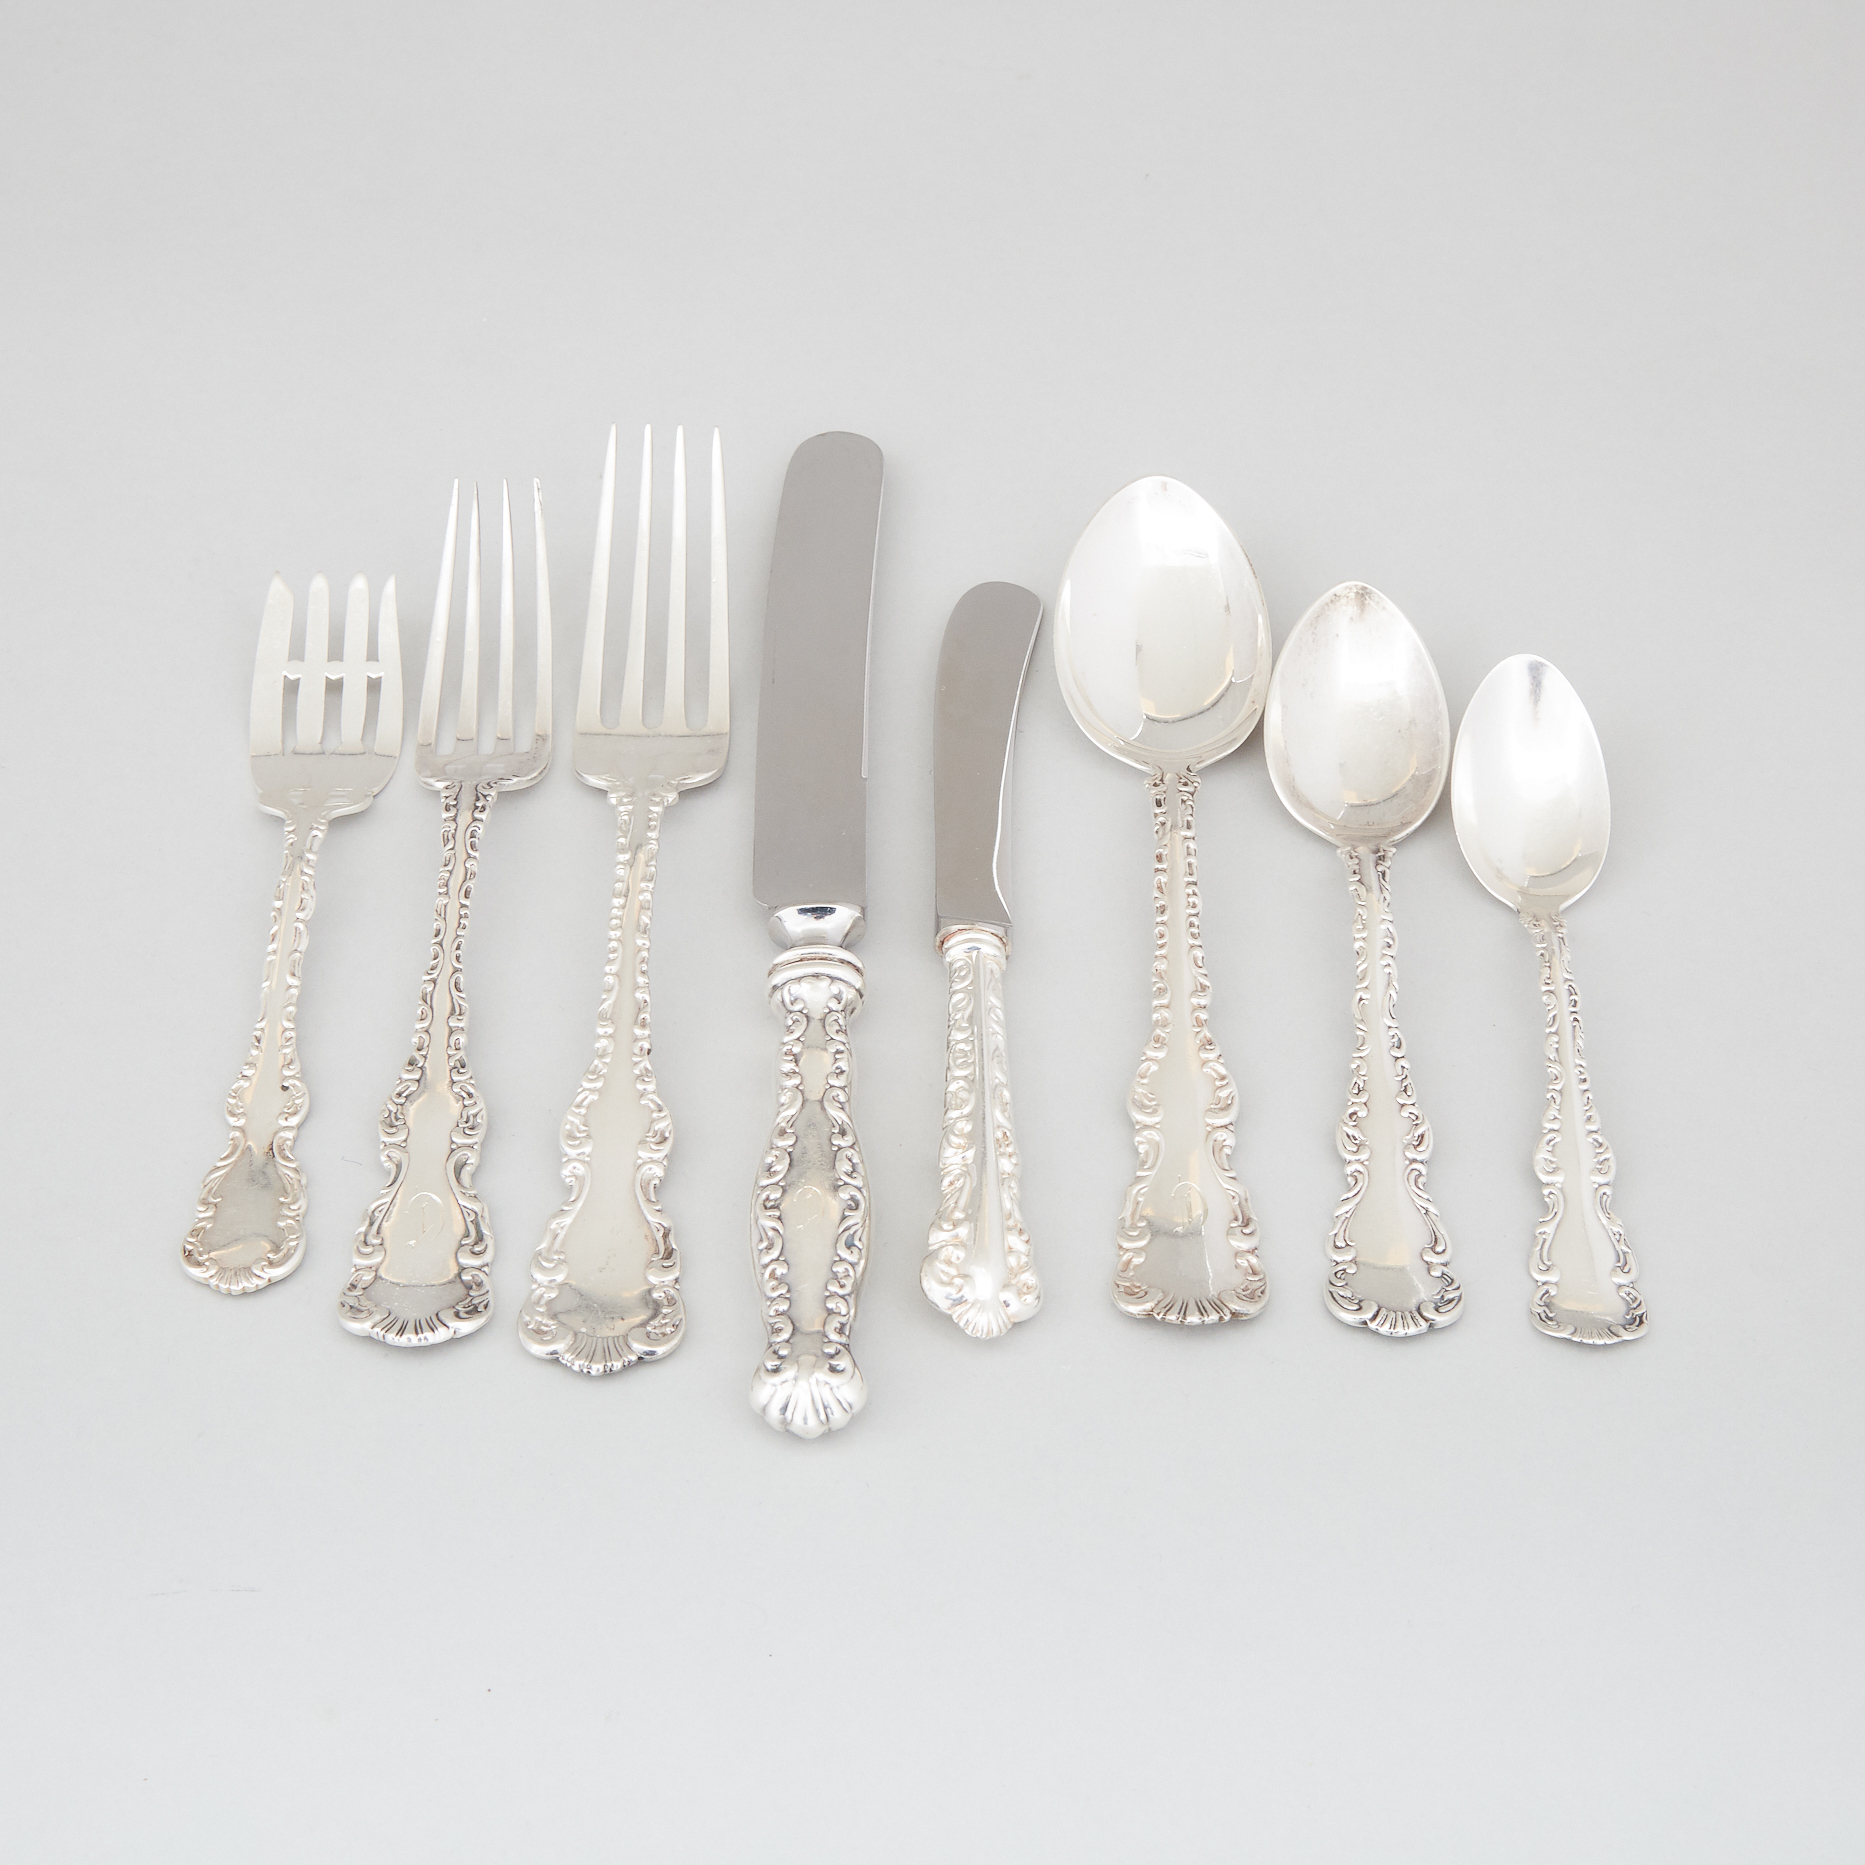 Canadian Silver ‘Louis XV’ Pattern Flatware, J.E. Ellis & Co. and Roden Bros., Toronto, Ont., early 20th century